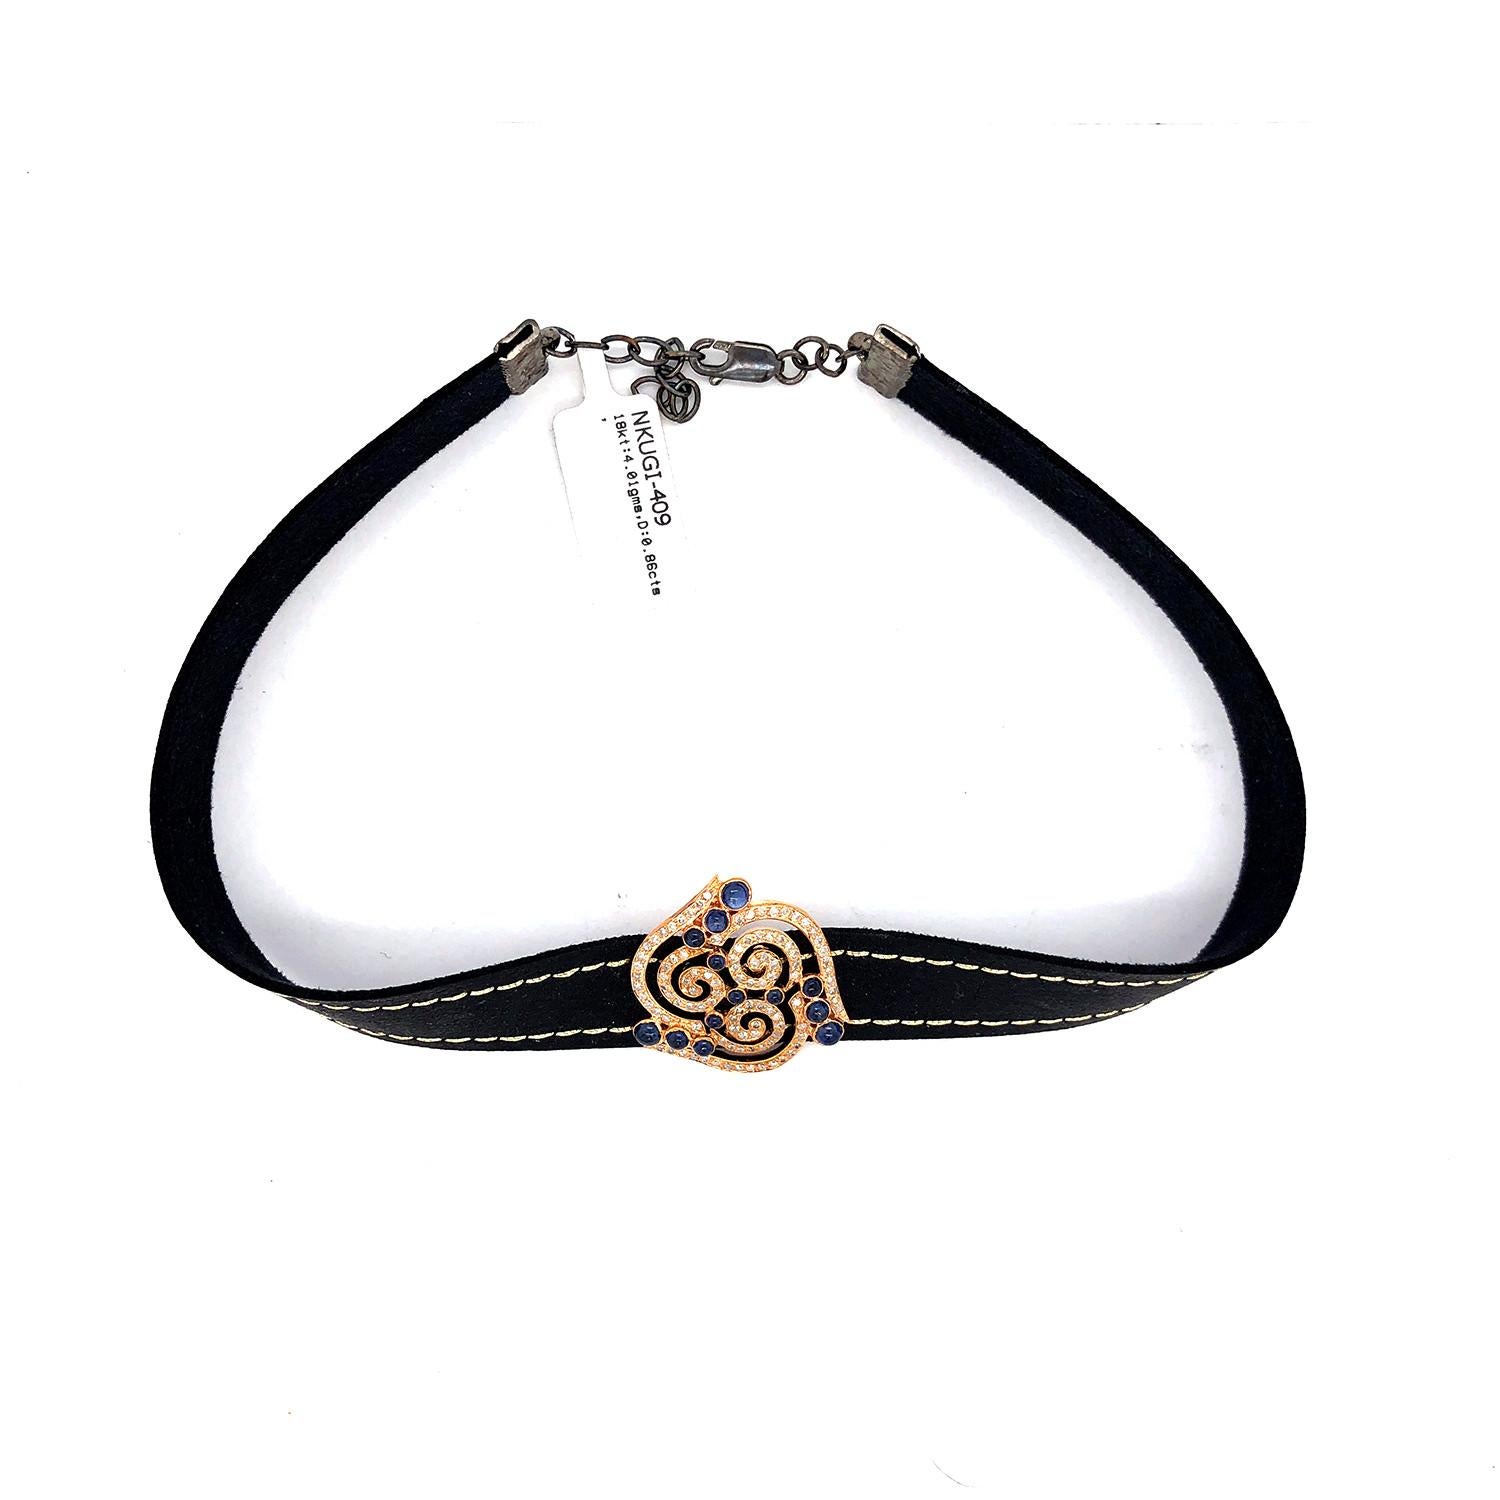 Art Nouveau Leather Choker Necklace with Swirl Ornamental Design with Diamond & Sapphire For Sale